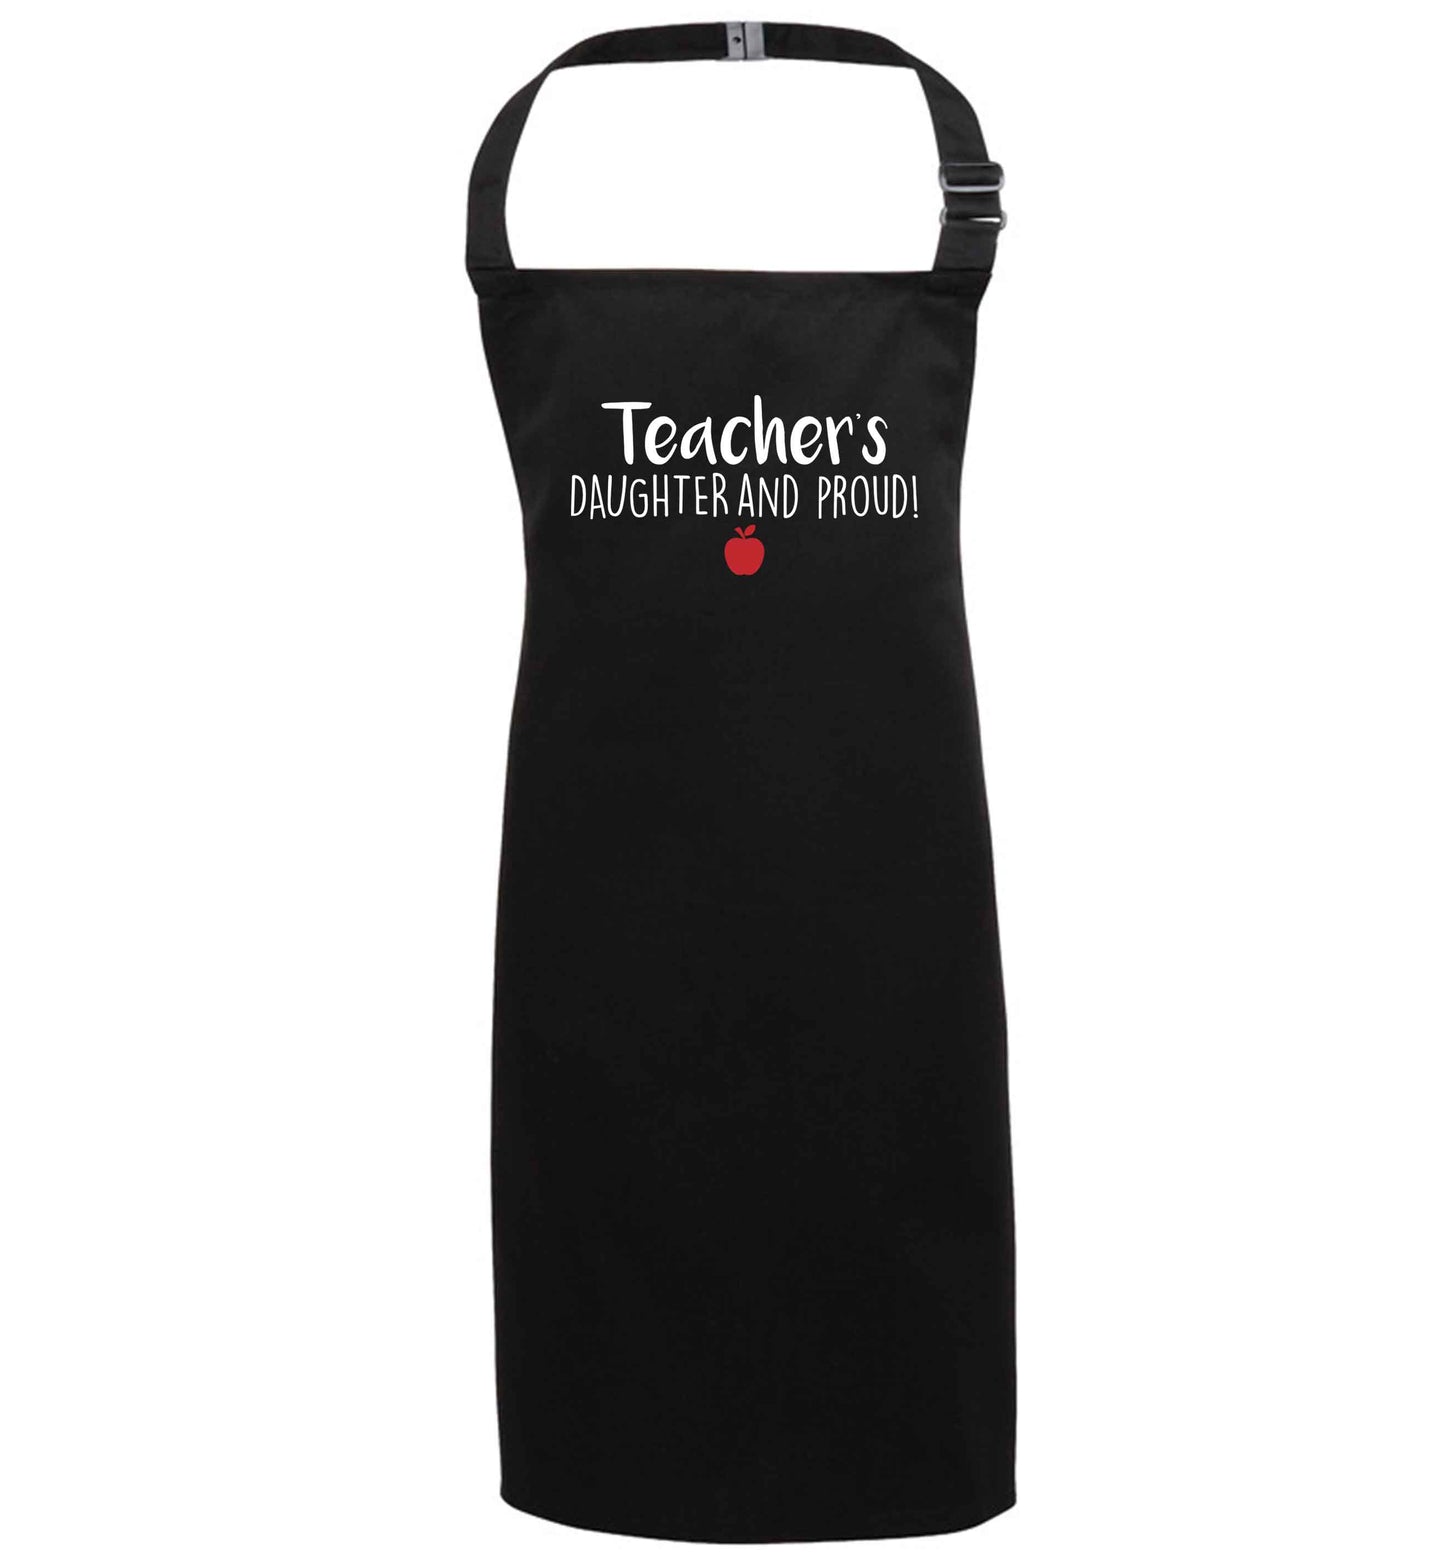 Teachers daughter and proud black apron 7-10 years